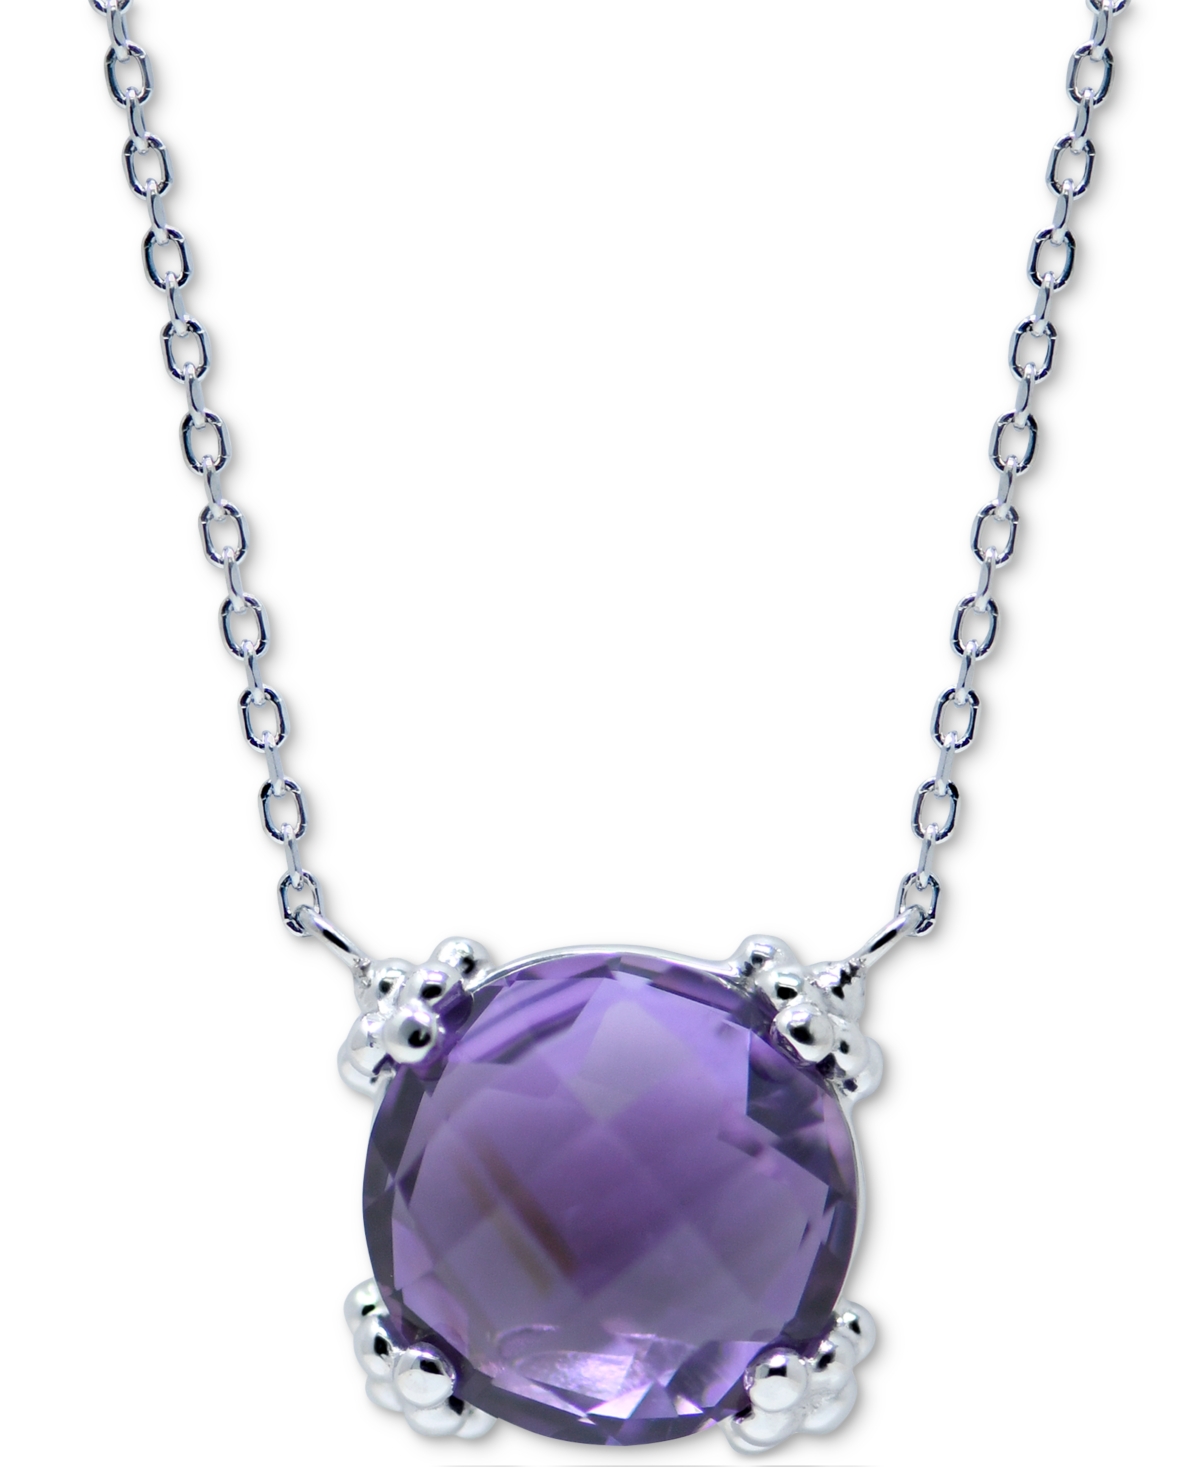 Anzie Amethyst Solitaire Pendant Necklace (2-7/8 ct. t.w.) in Sterling Silver, 16" + 1" extender